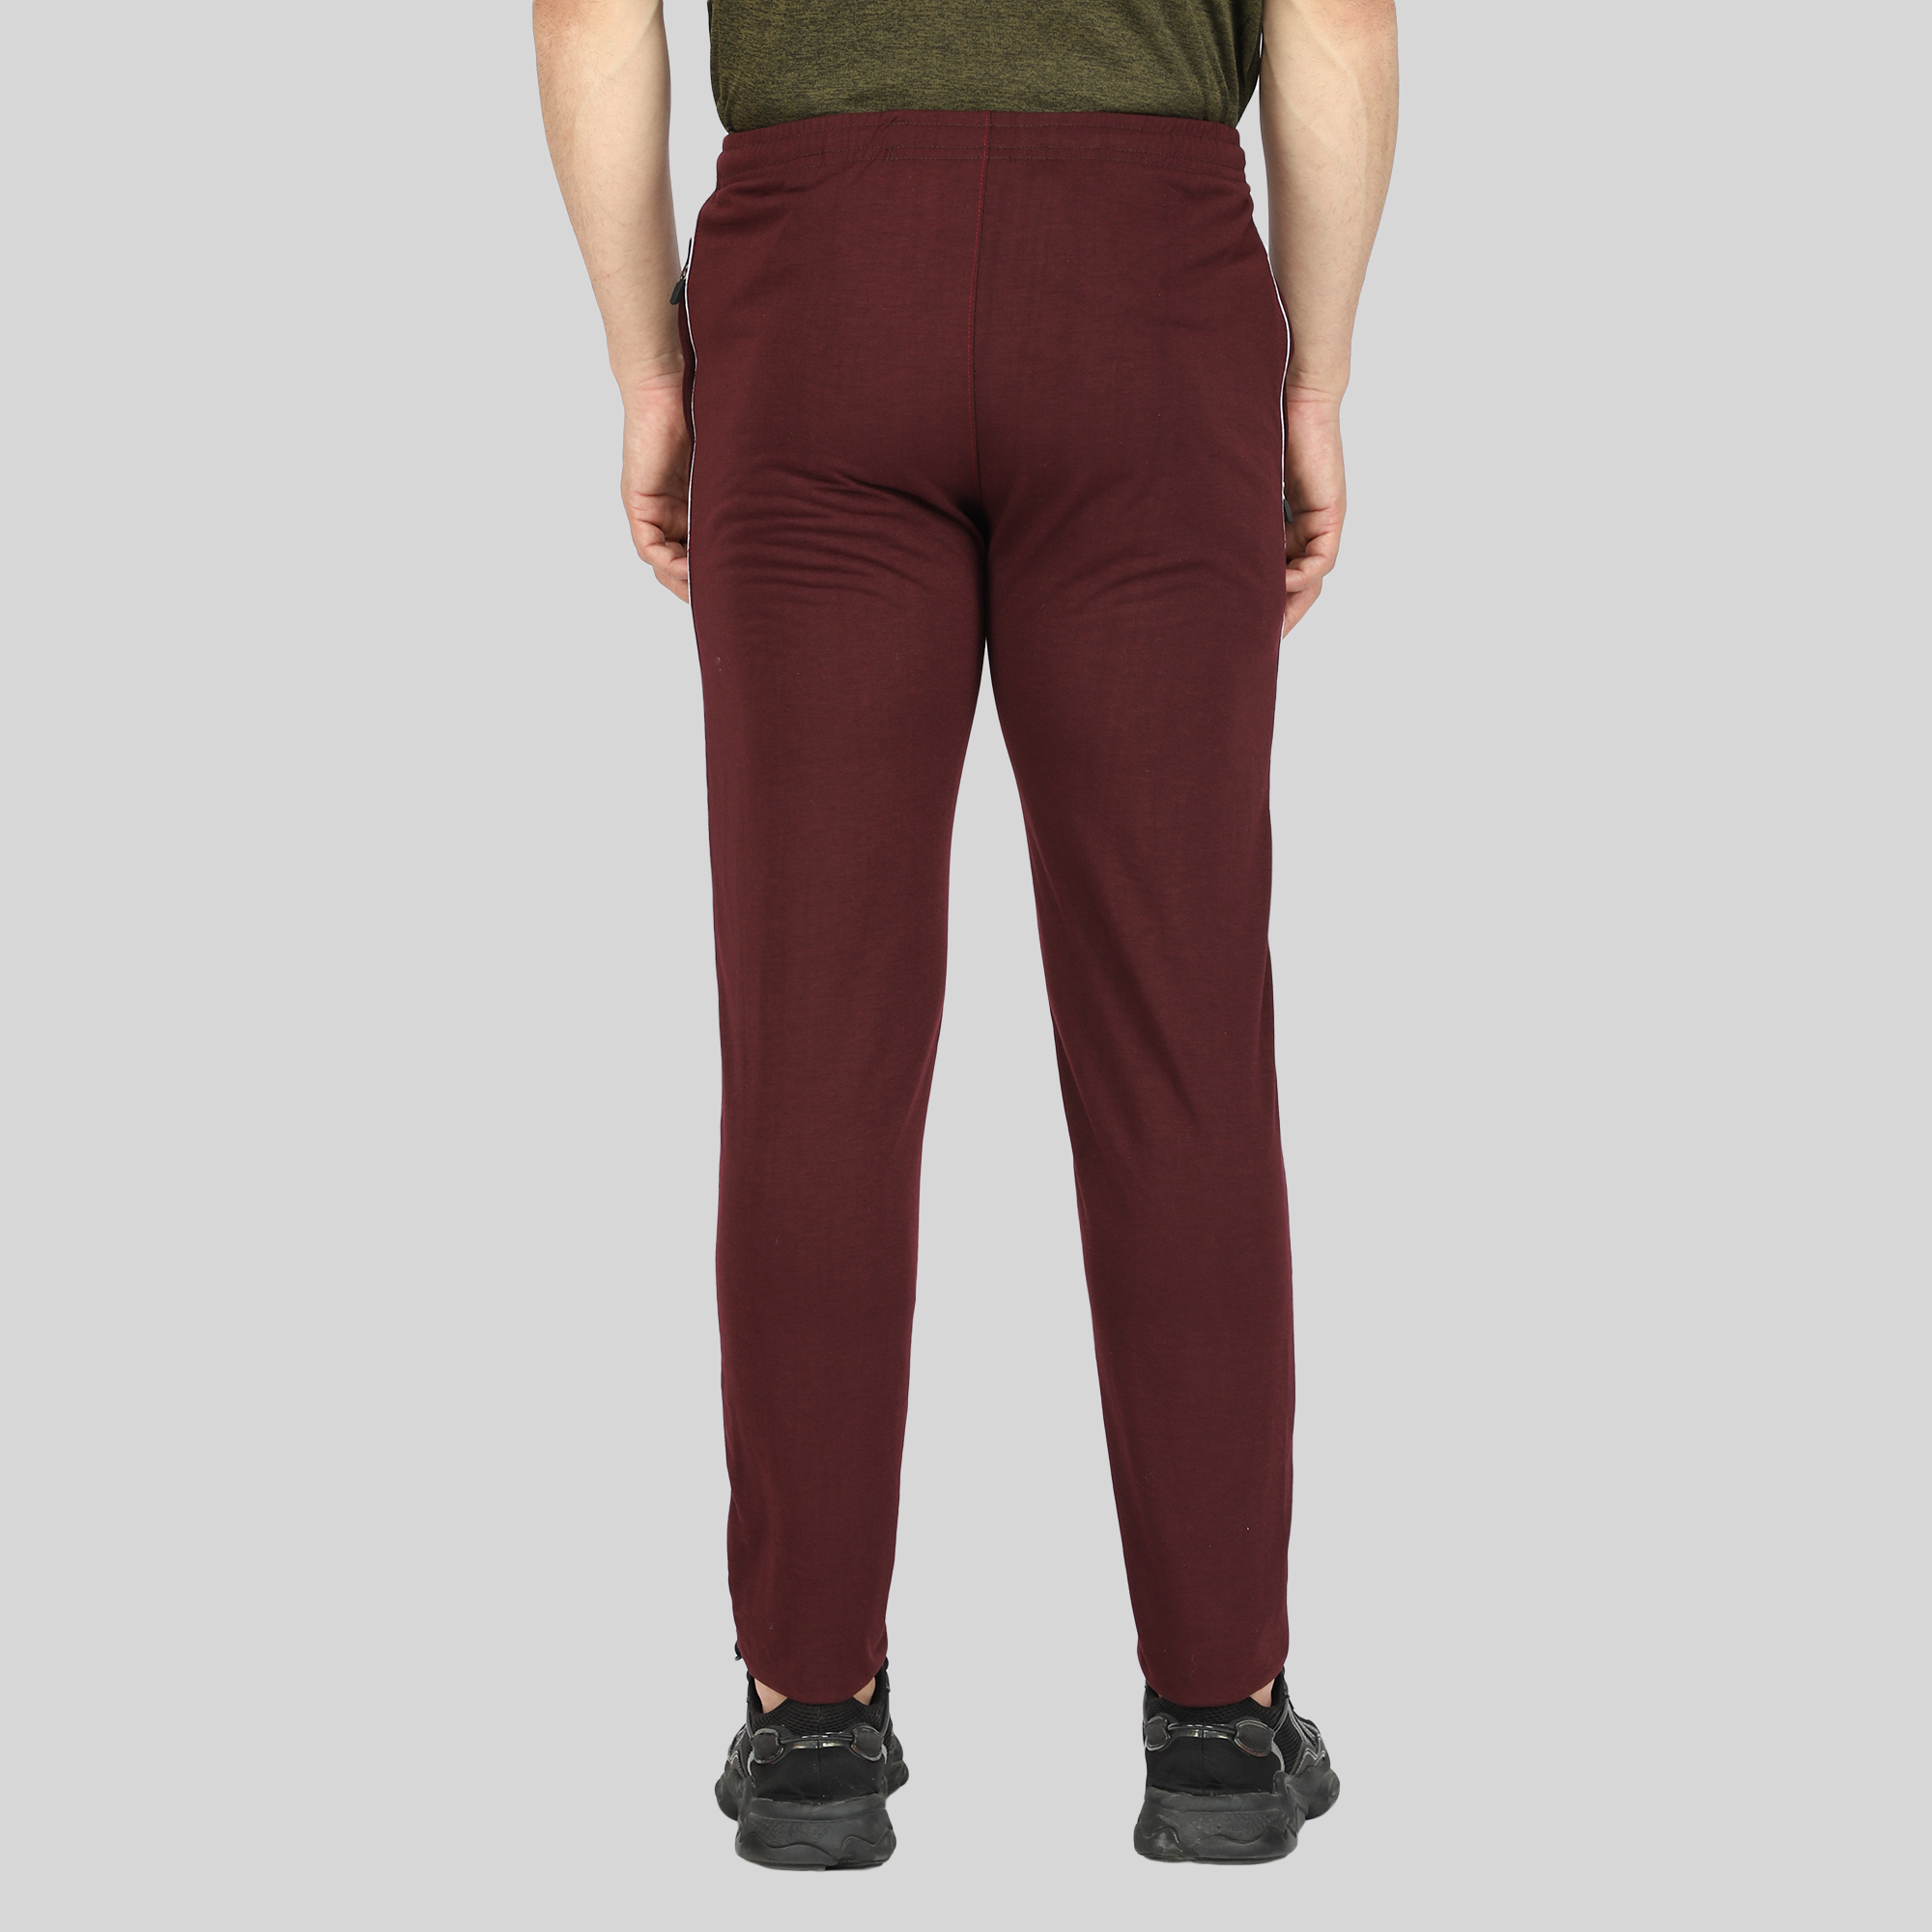 Dark Red & Maroon Pants For Guy's With Shirts Combination Outfits Ideas  2022 | Polo shirt outfits, Men fashion casual shirts, Shirt outfit men